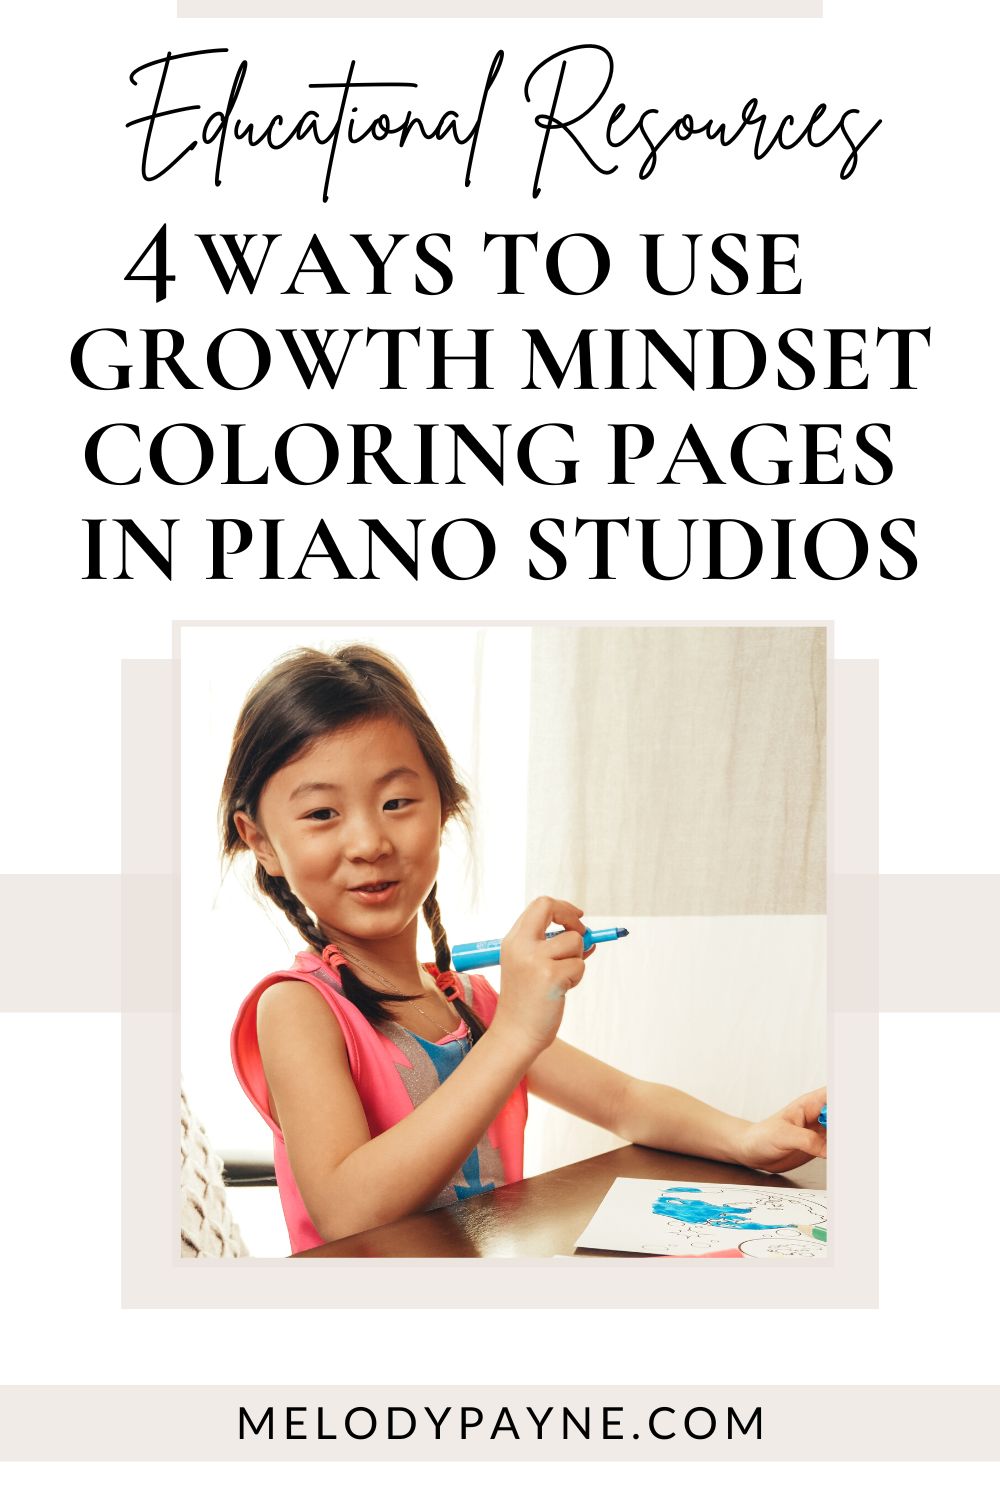 4 ways to use growth mindset coloring pages in your piano studio